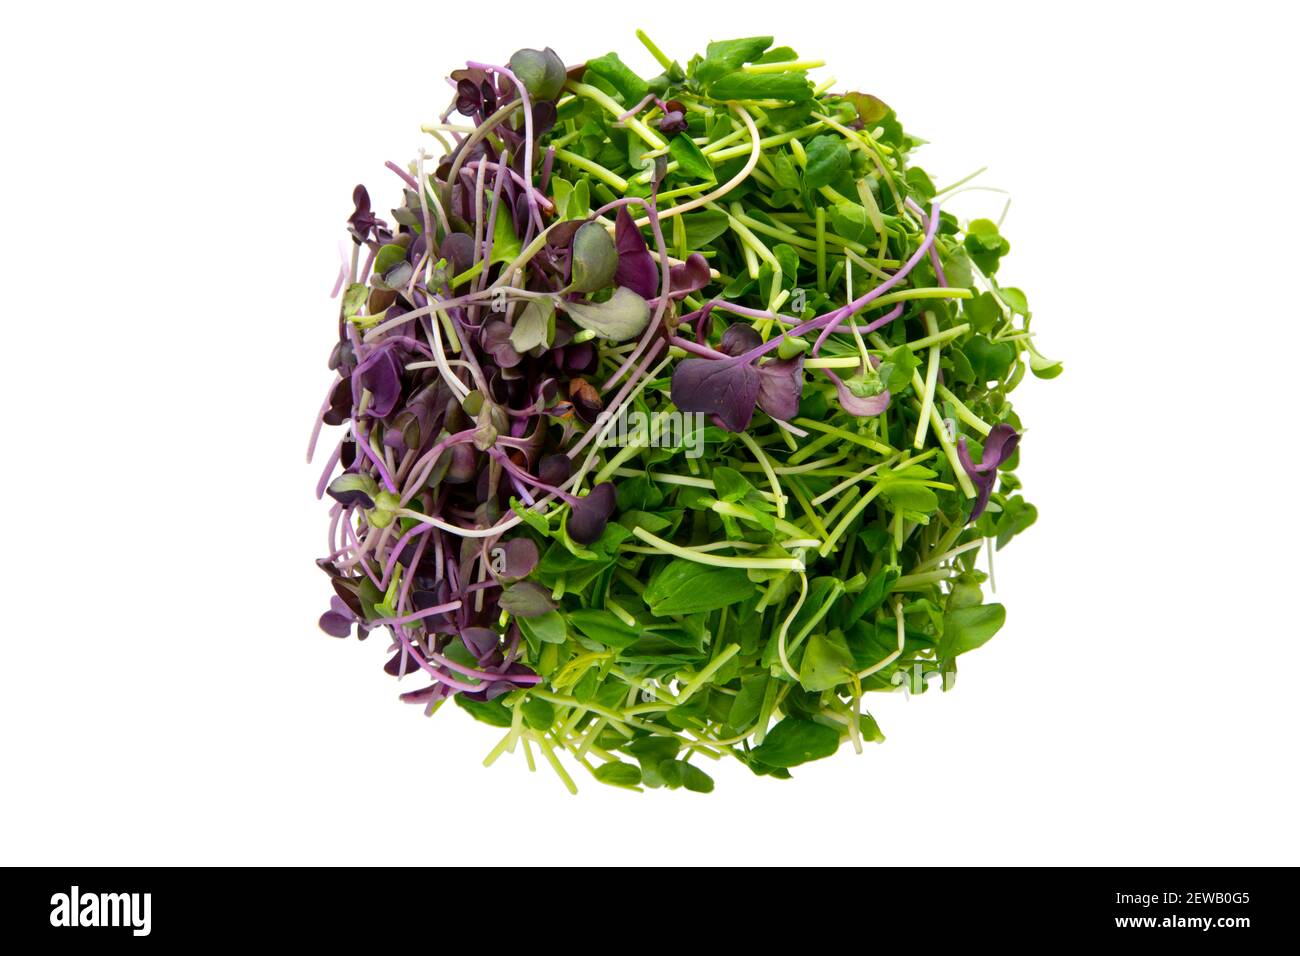 A round ball of healthy micro greens sitting on a pure white background Stock Photo